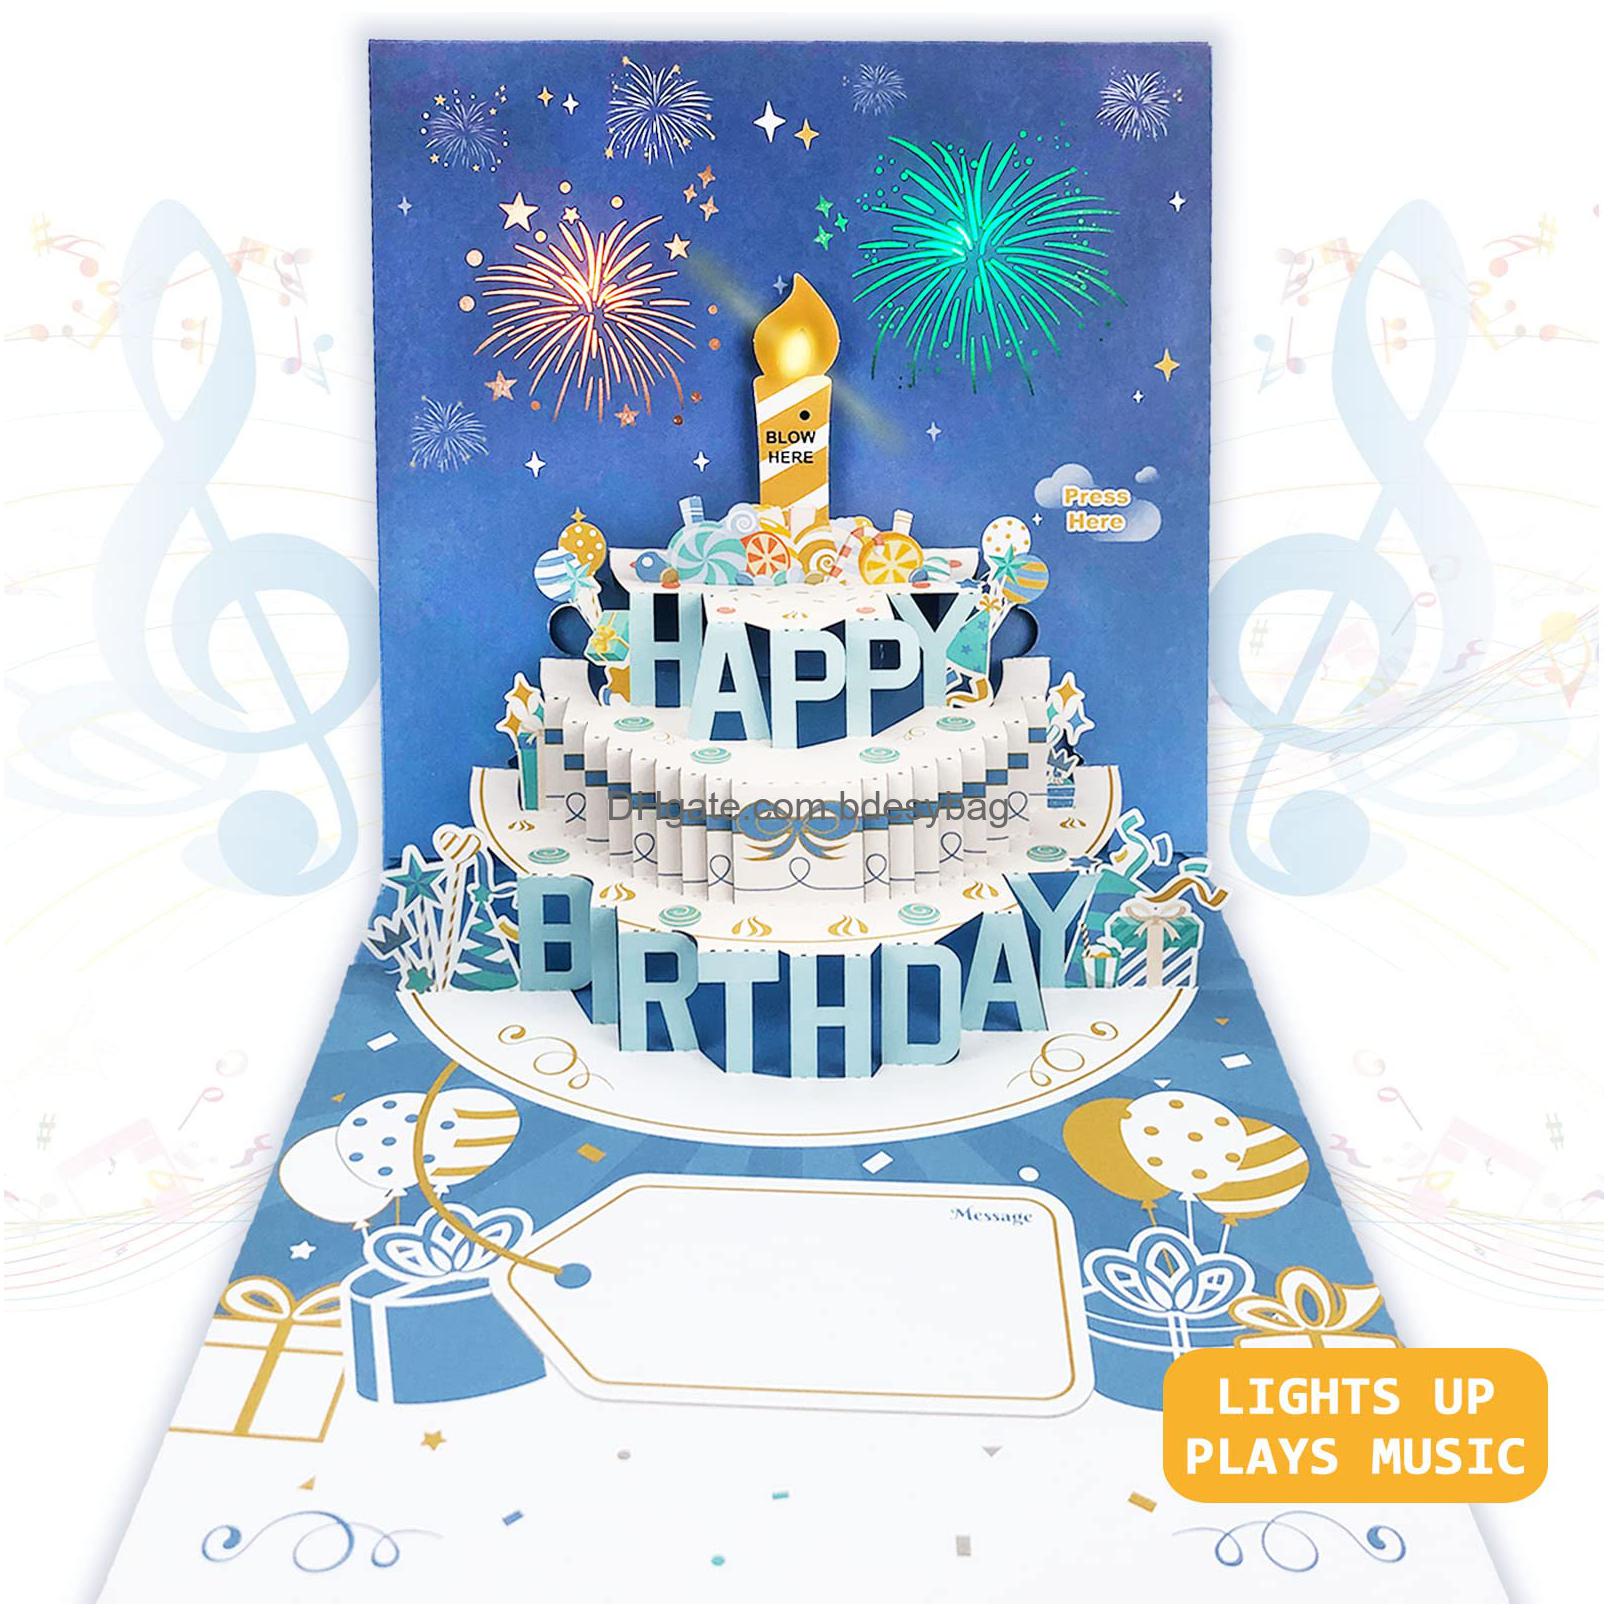 musical birthday cards with light and music blowable 3d birthday popup cards up birthday cards for men women plays hit song happy birthday